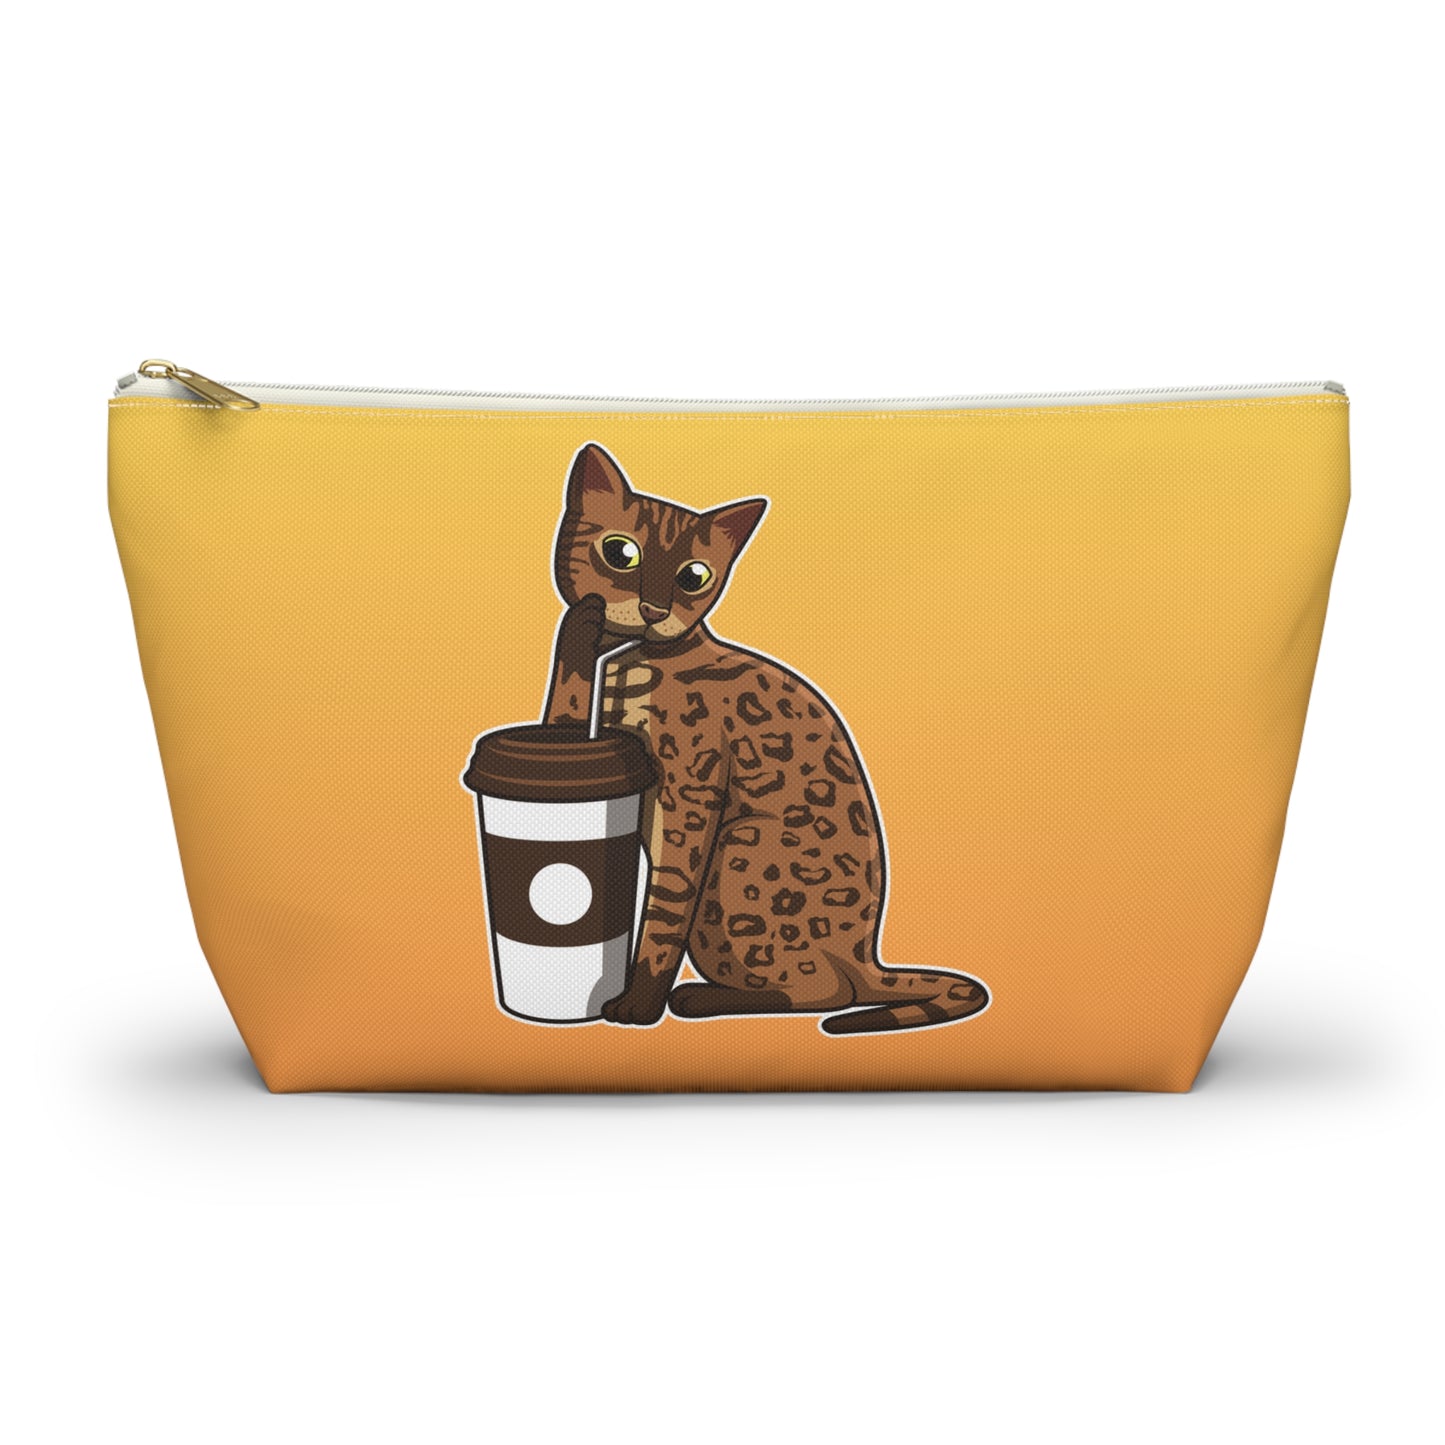 Drinking Cat Accessory Bag (Yellow)